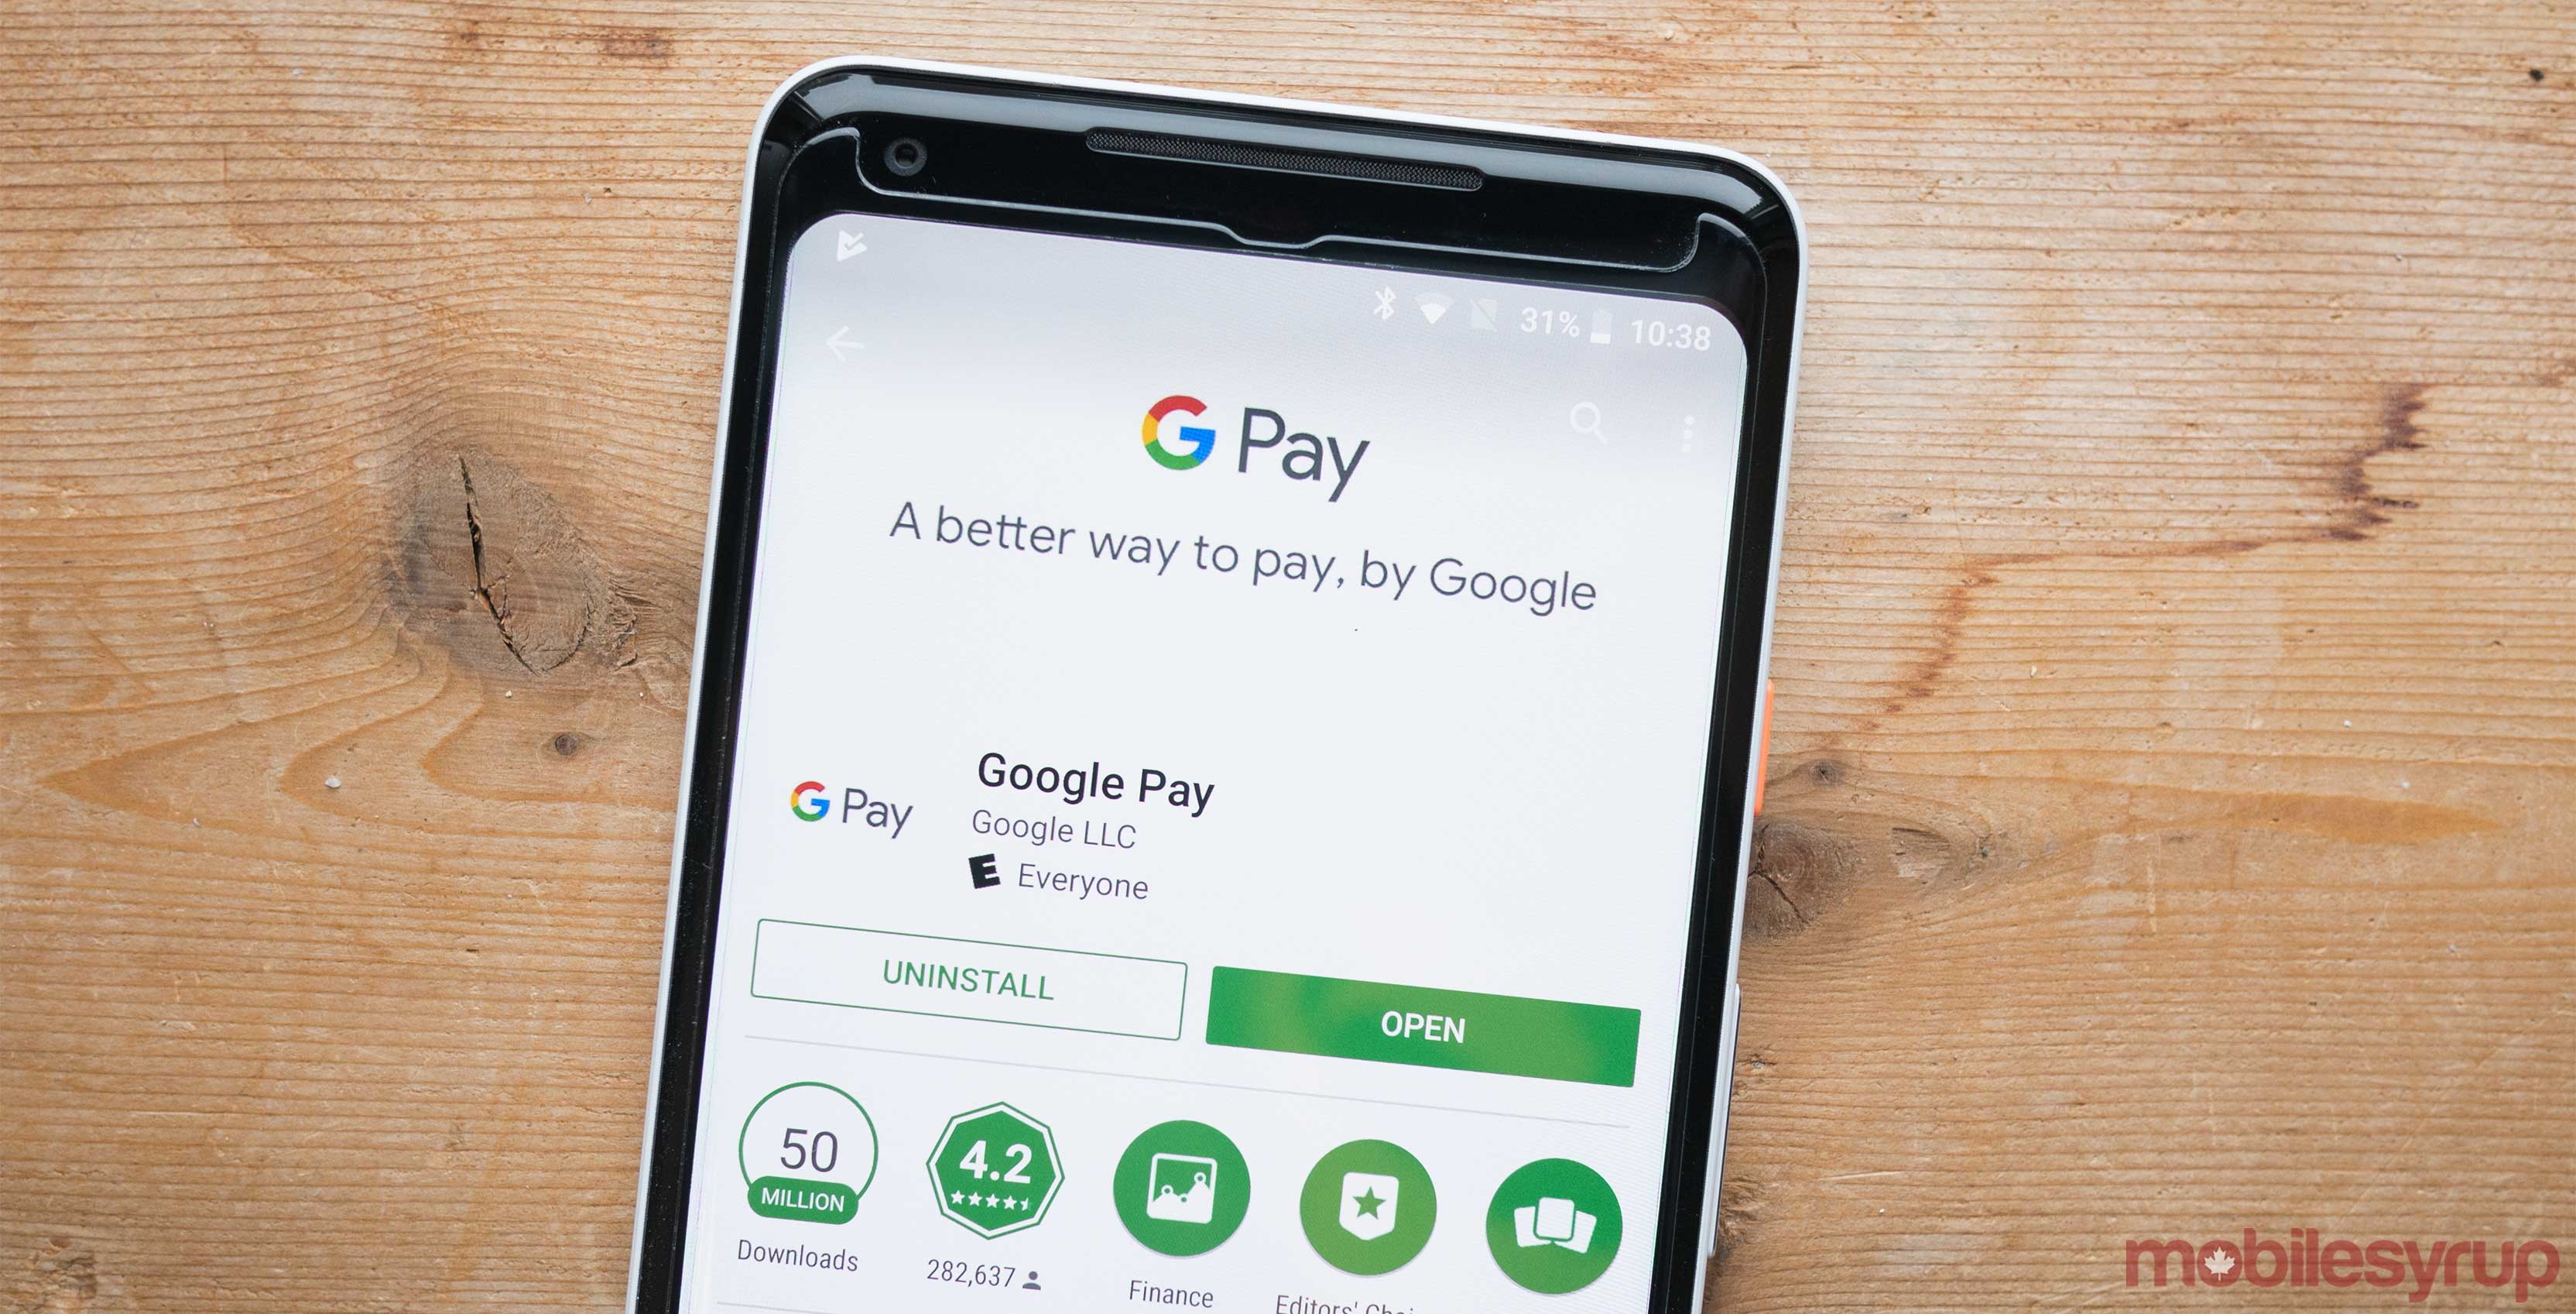 google pay introduced nearby spot option for shopping